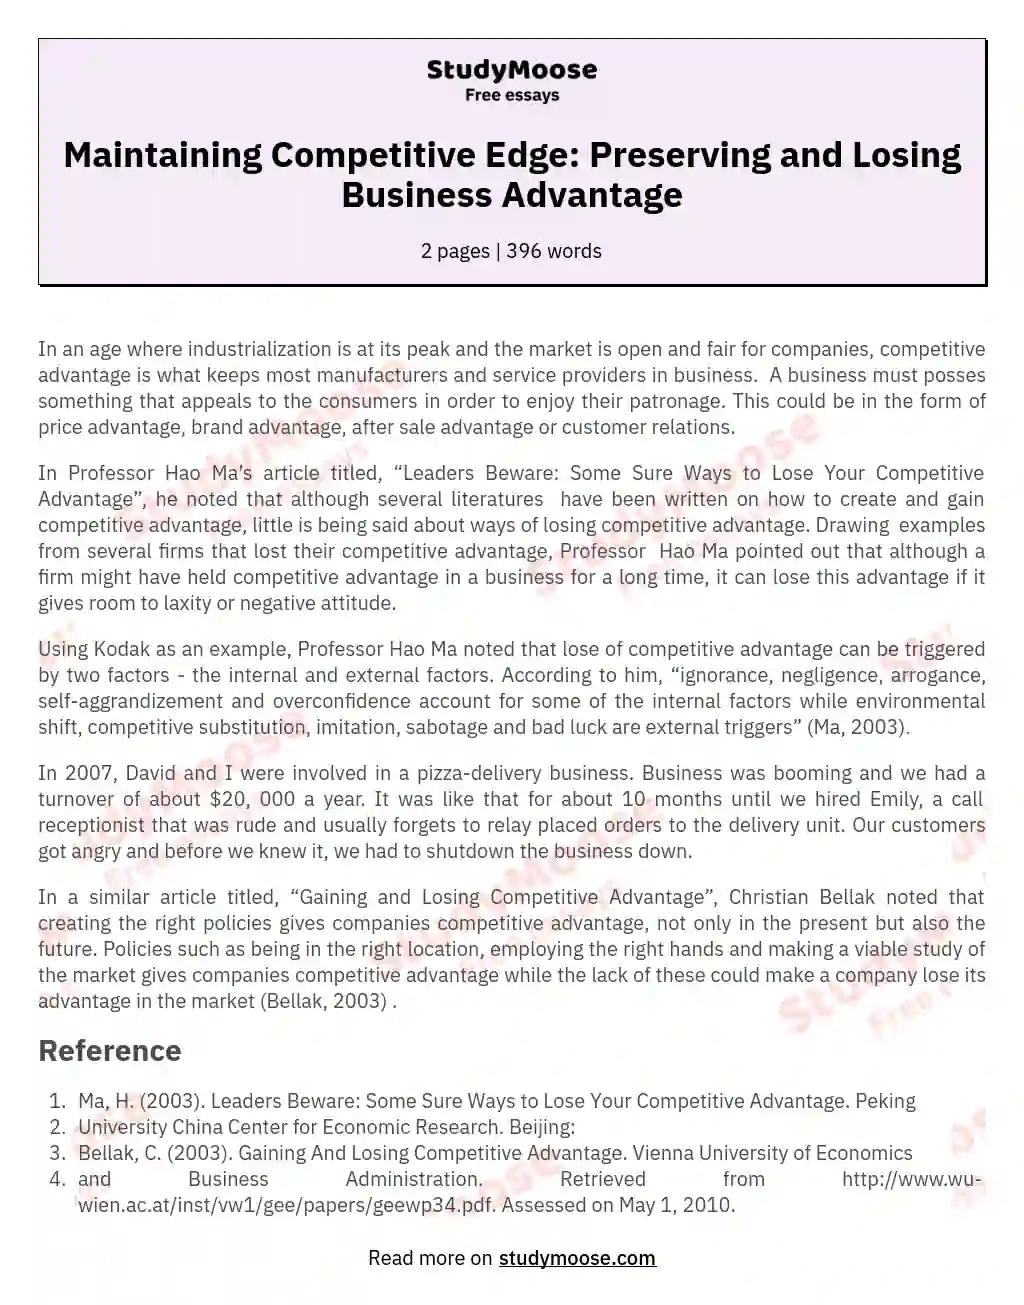 Maintaining Competitive Edge: Preserving and Losing Business Advantage essay